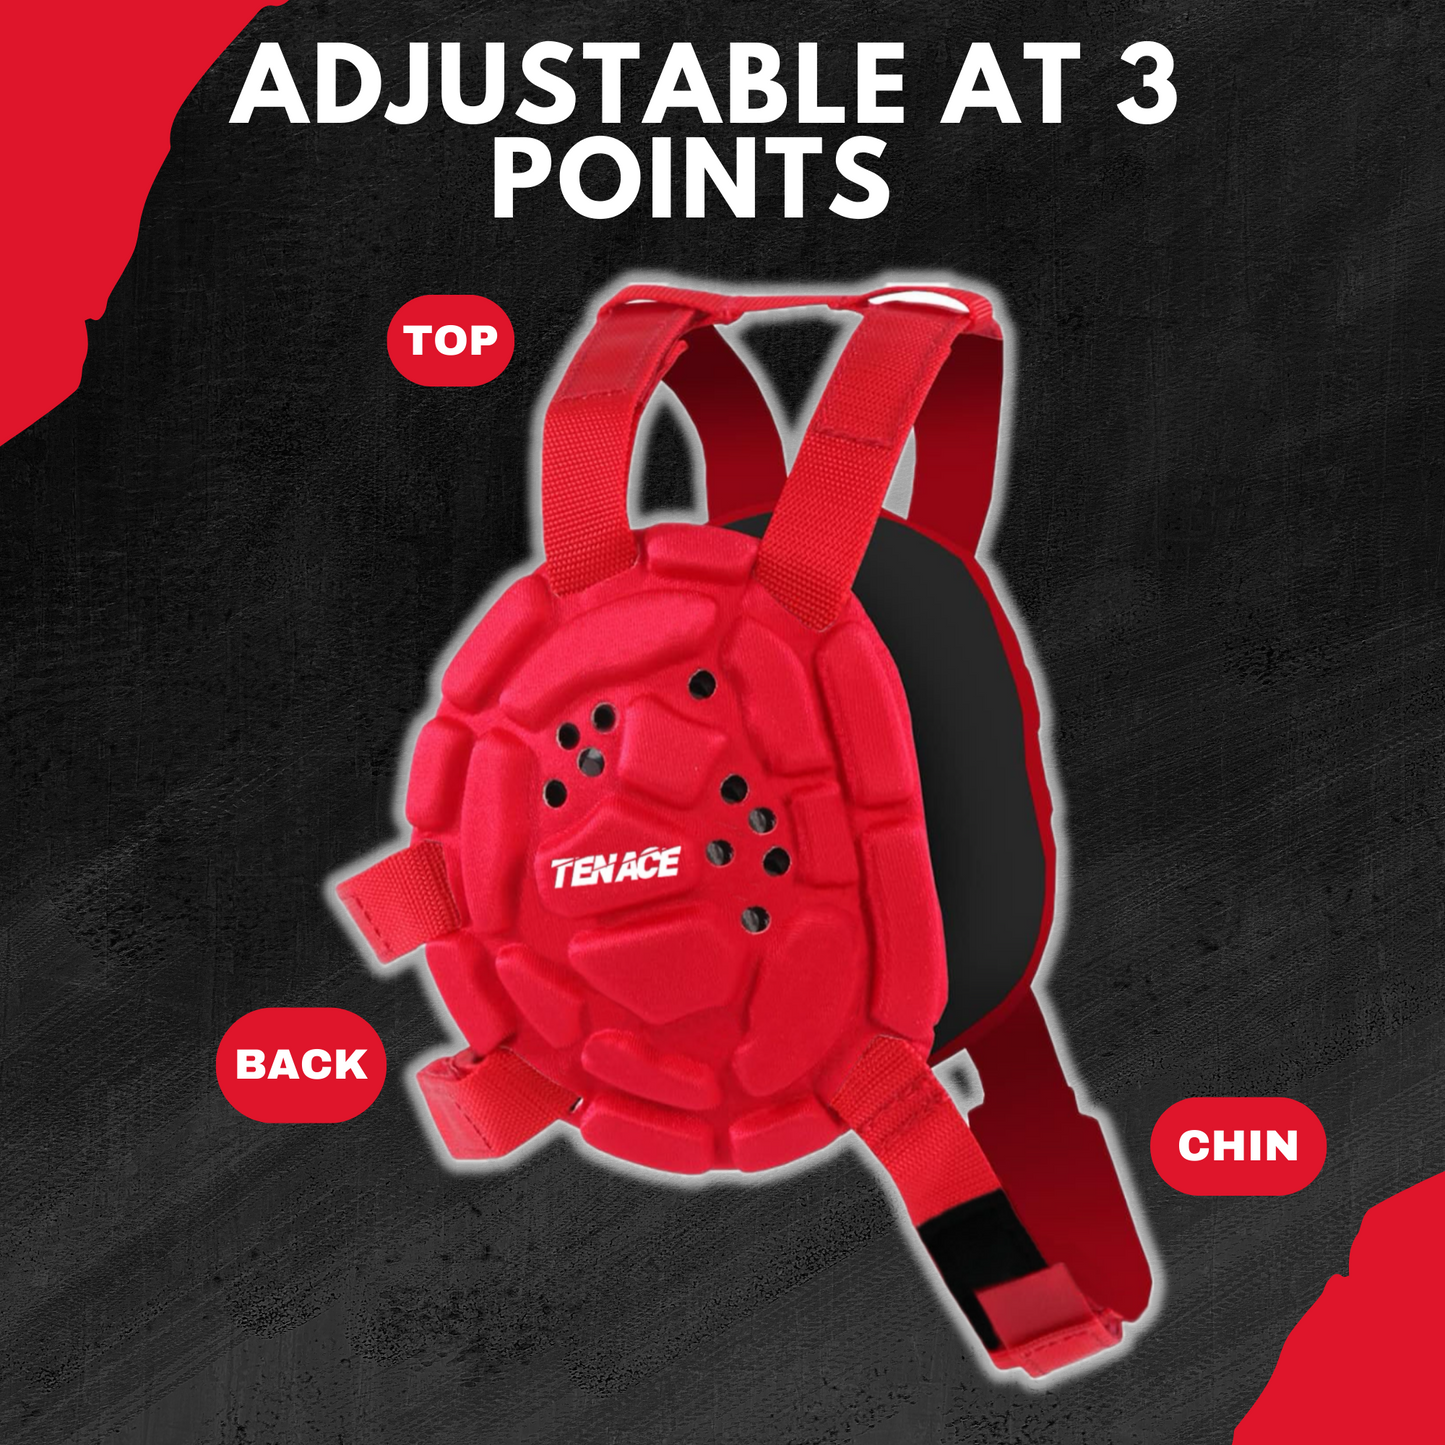 ARMOR BJJ MMA Grappling Fighting Ear guards - Red